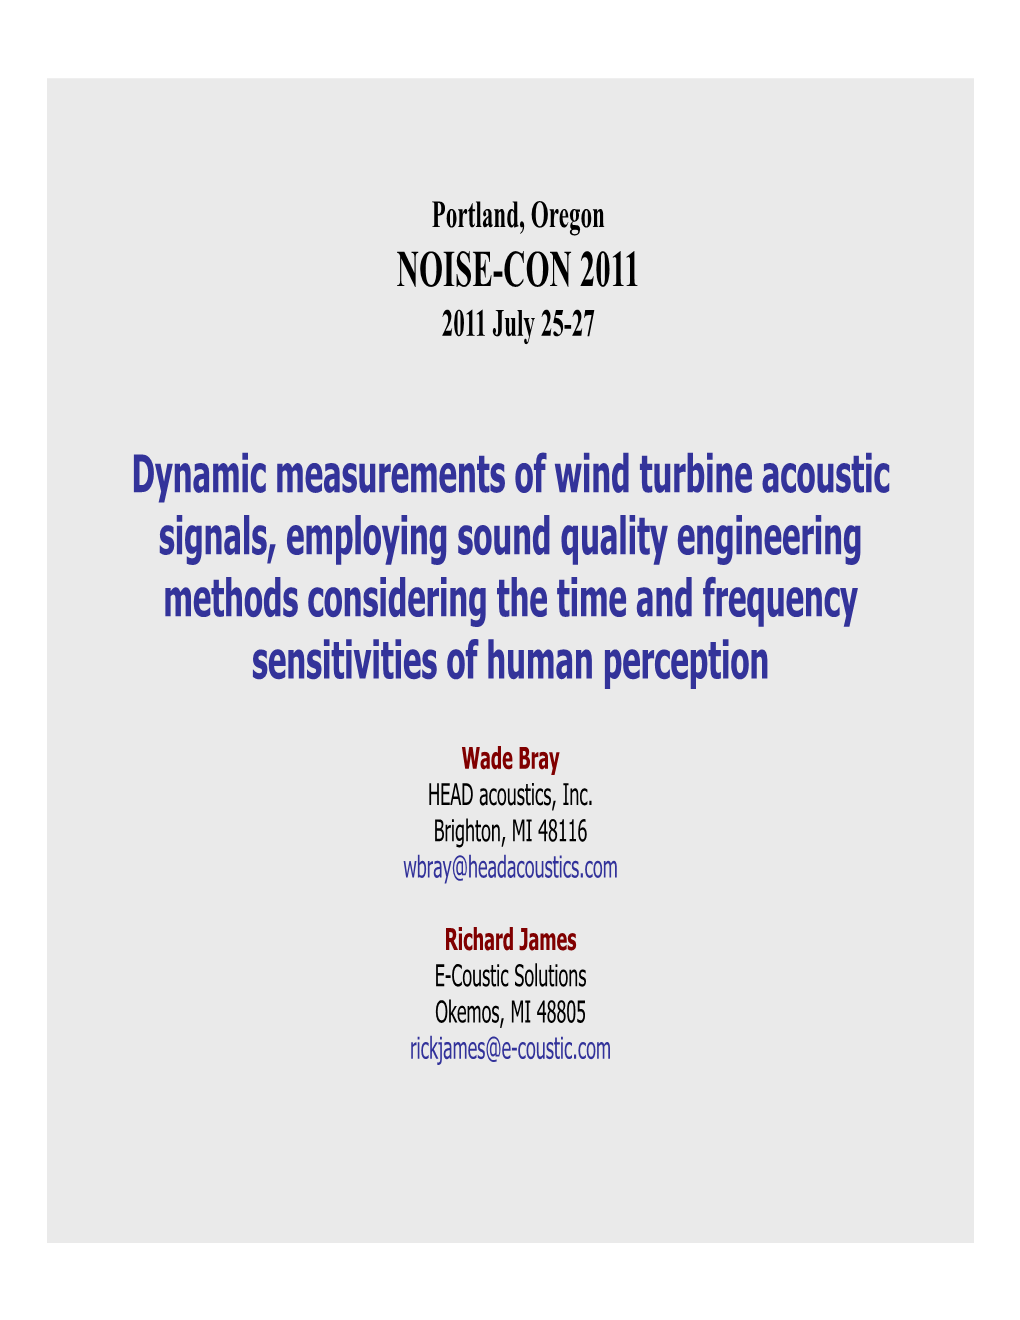 Dynamic Measurements of Wind Turbine Acoustic Signals, Employing